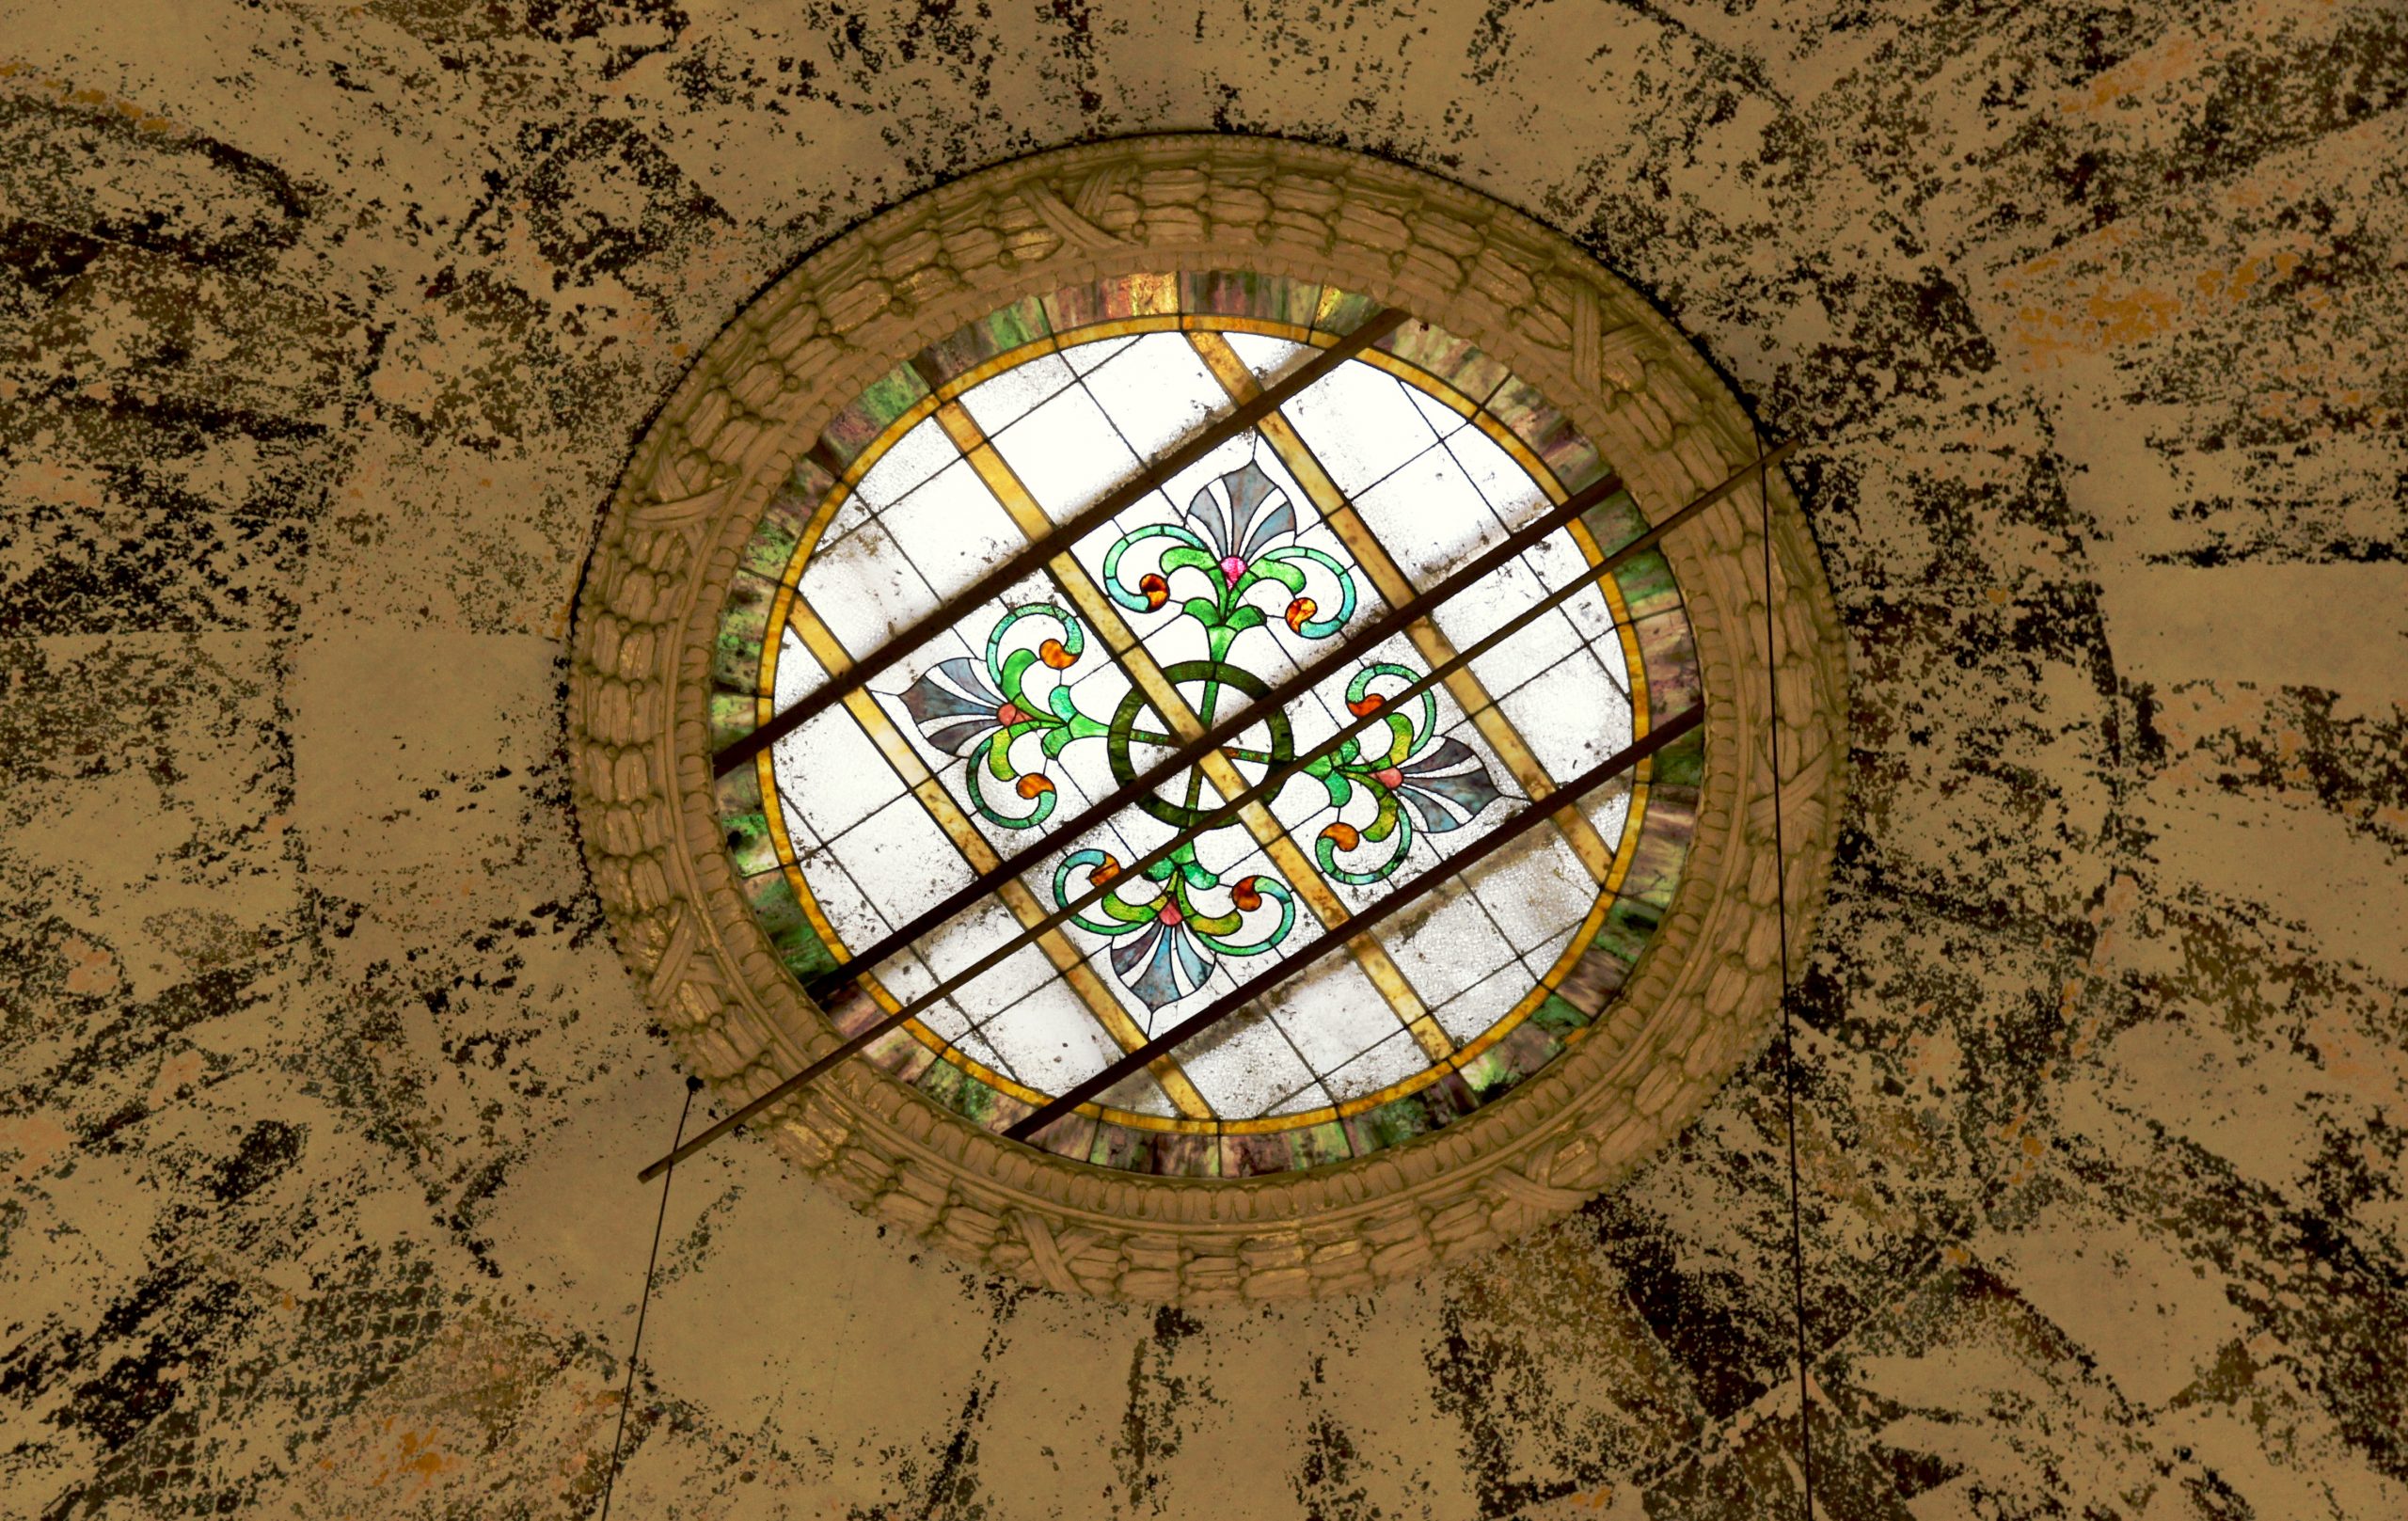 Photo of a stained glass skylight in a famous, old building on campus.